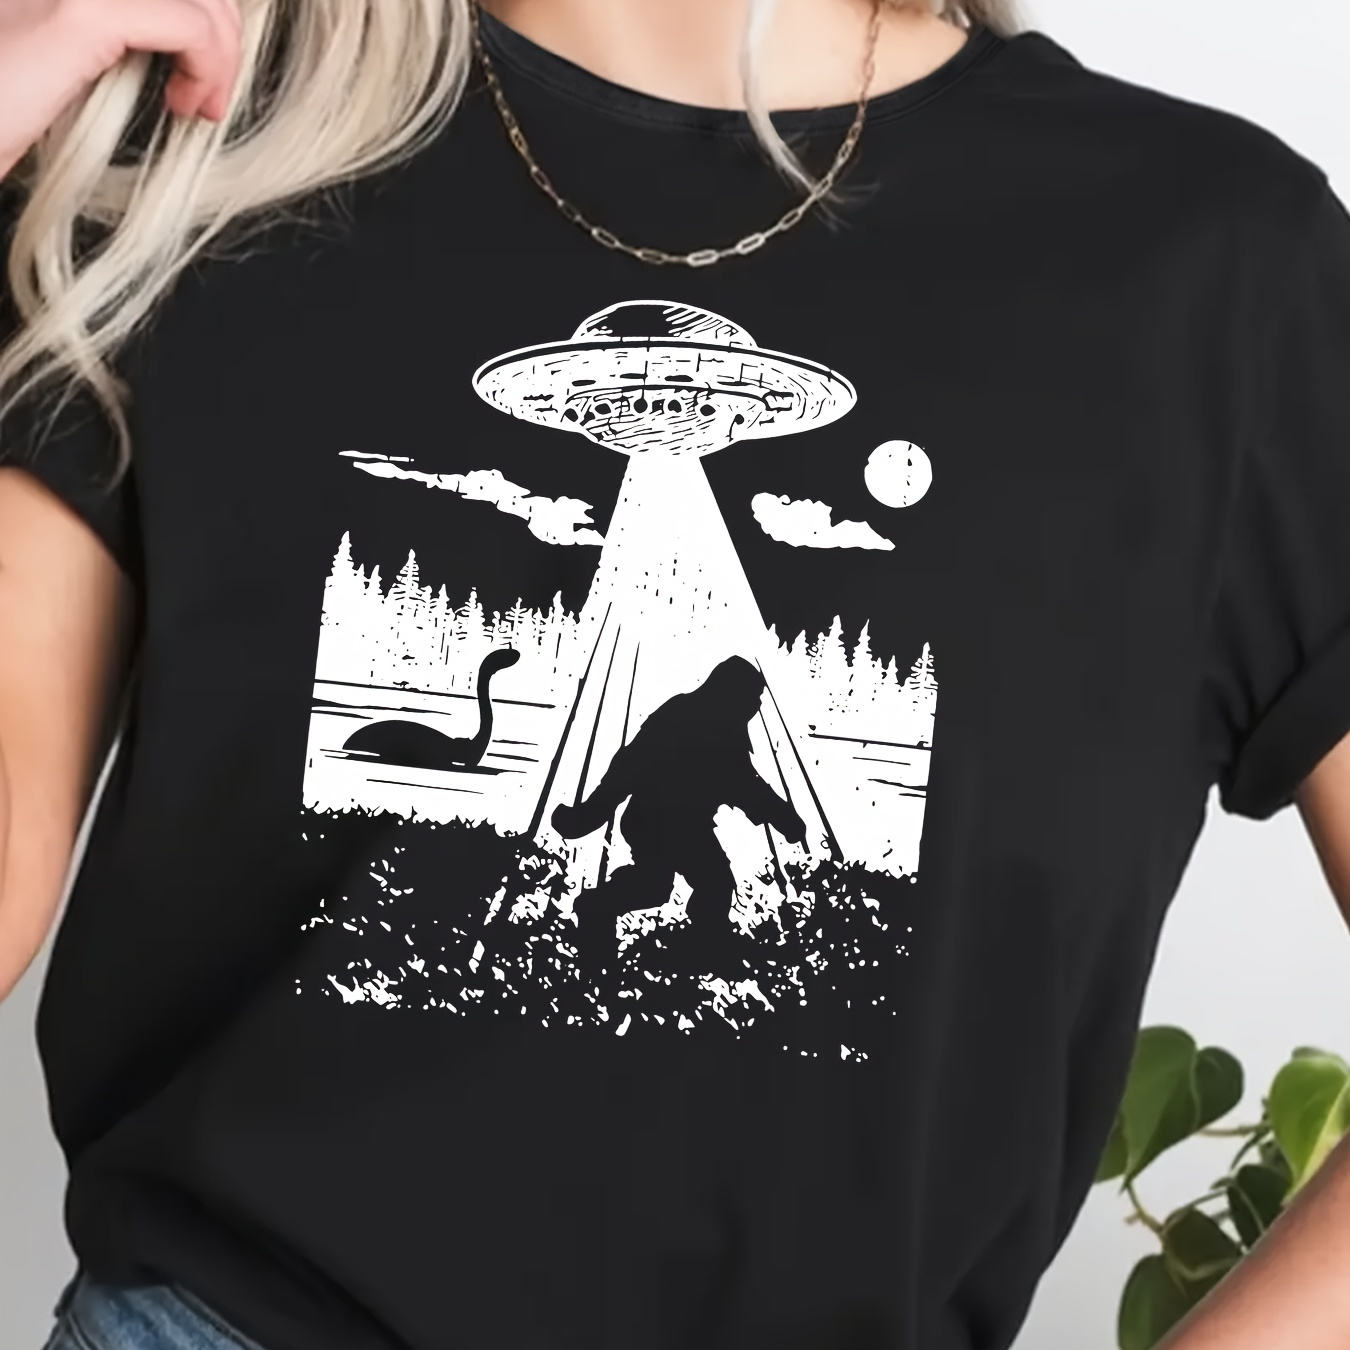 

Women's Ufo Graphic Tee, Casual Short Sleeve Top, Fashionable Sporty Style T-shirt, Extraterrestrial & Sasquatch Illustration Print, Streetwear